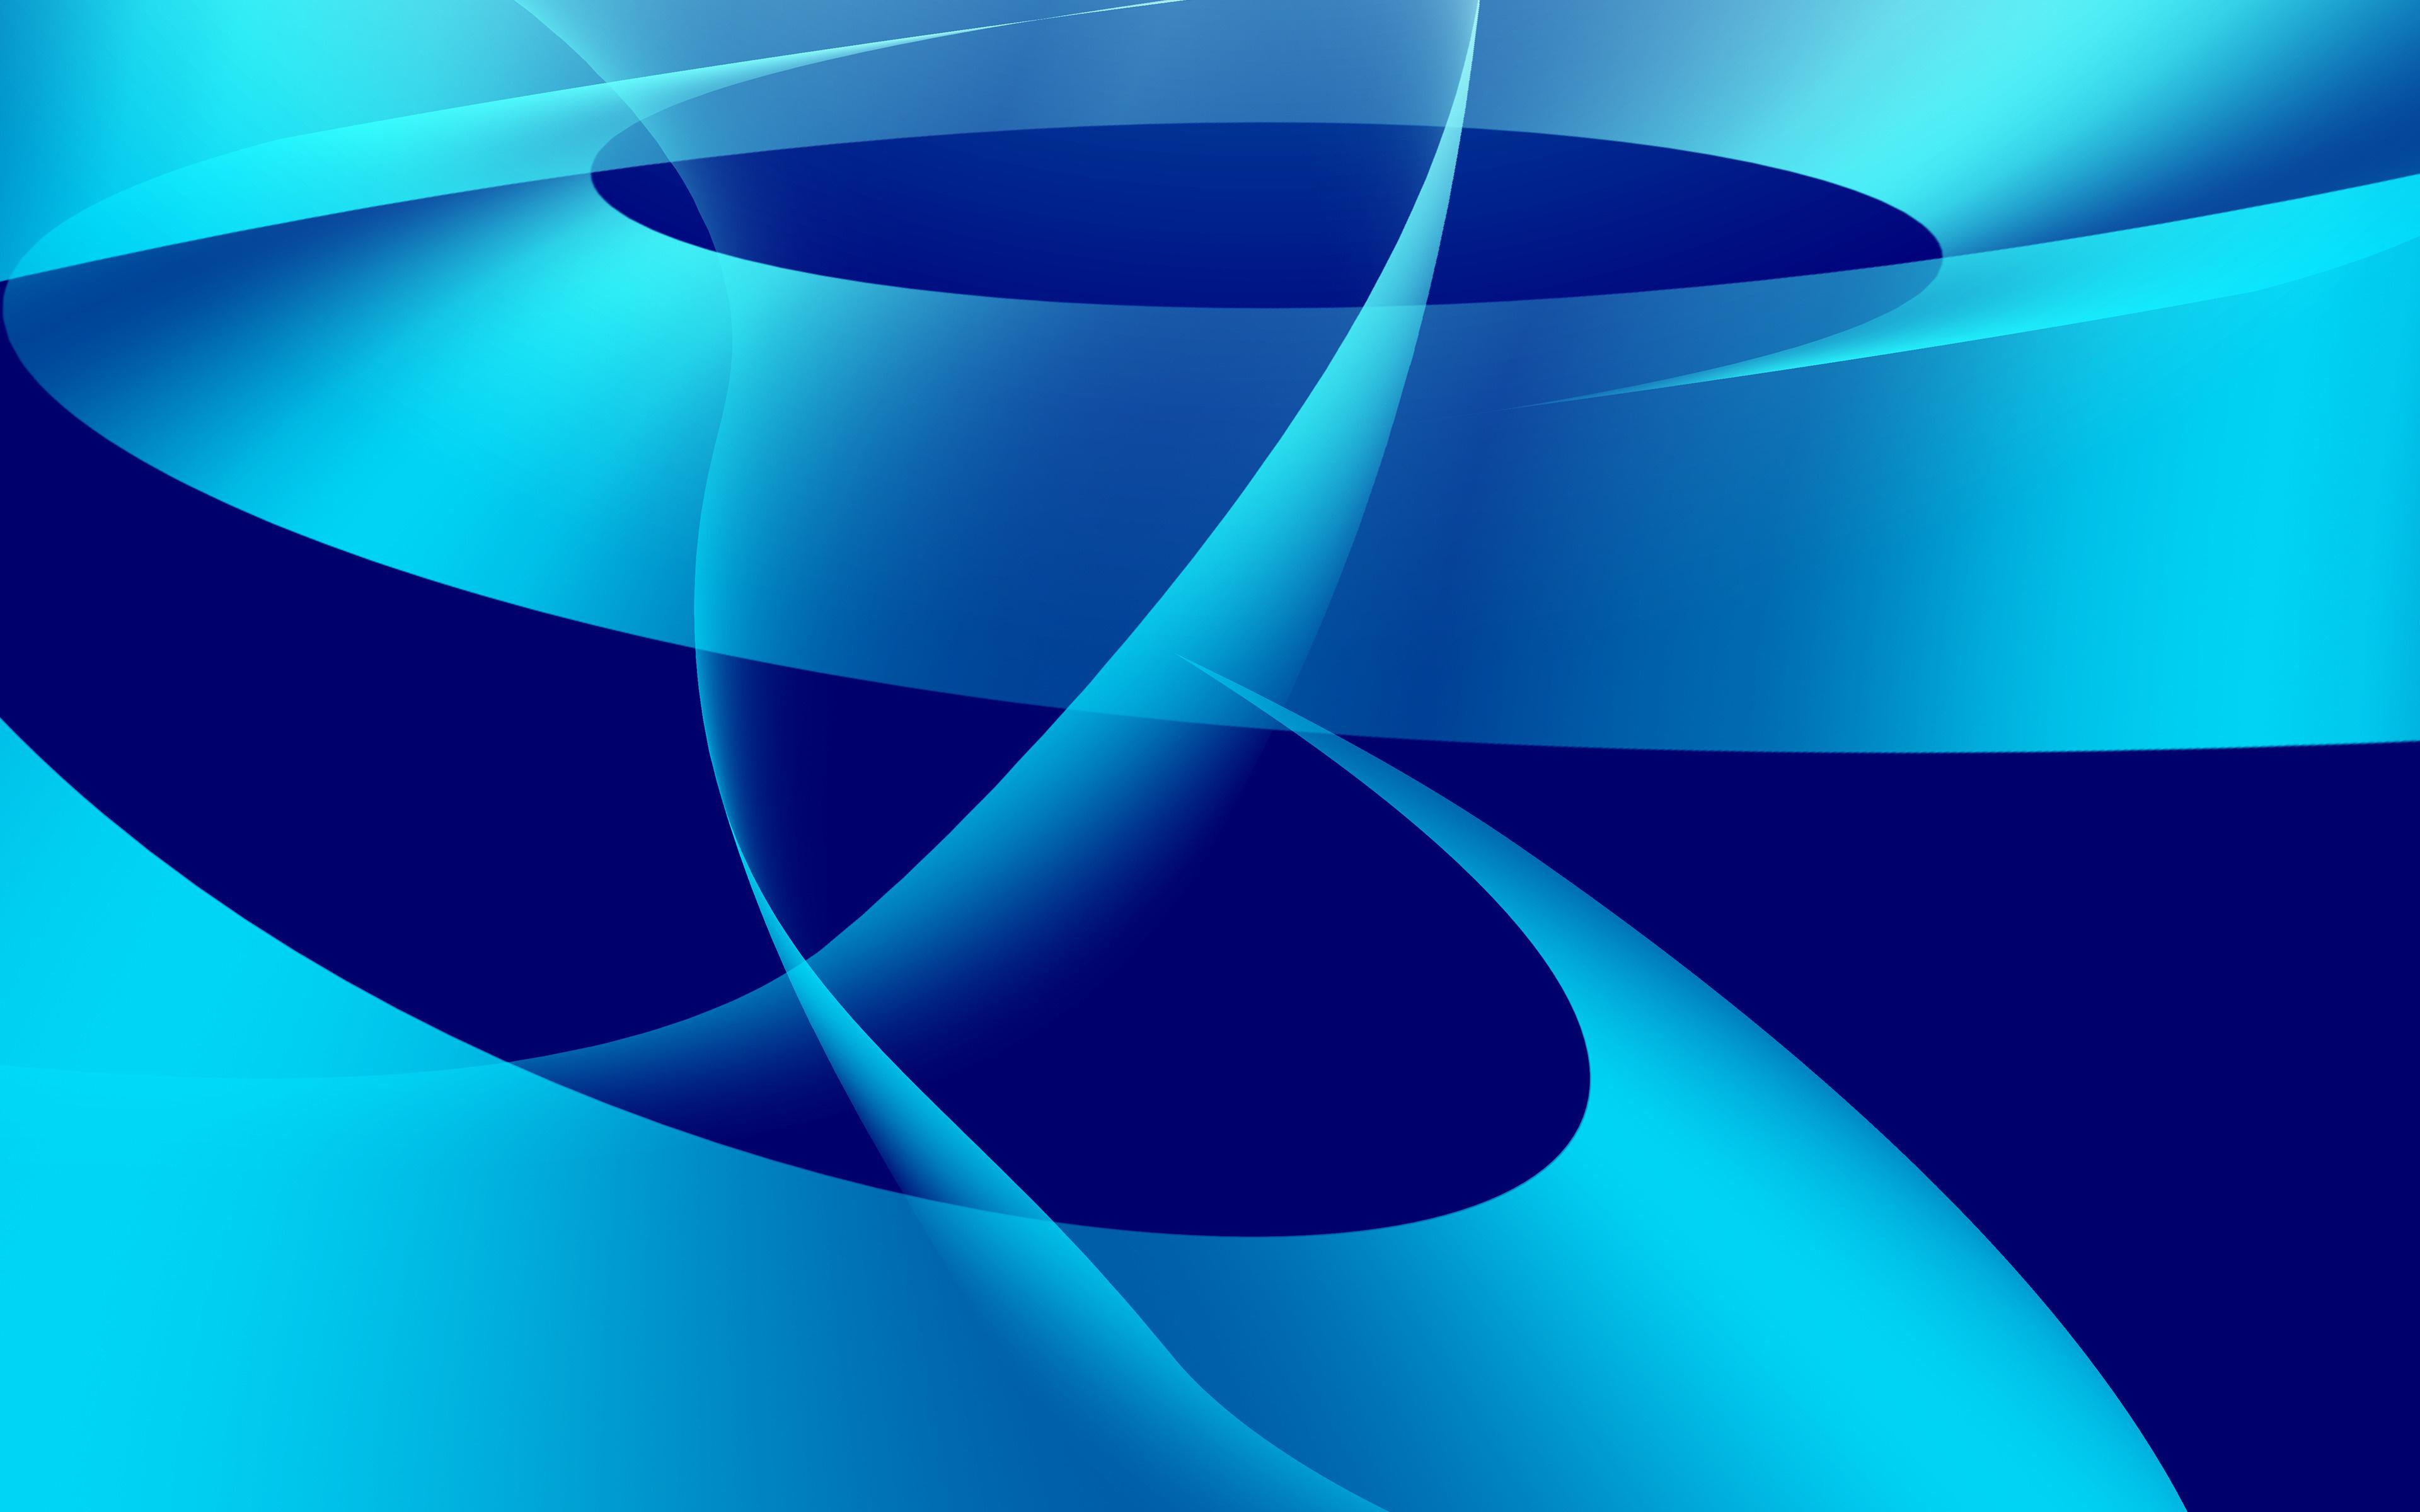 Download 3840x2400 wallpaper blue waves, abstract, blue